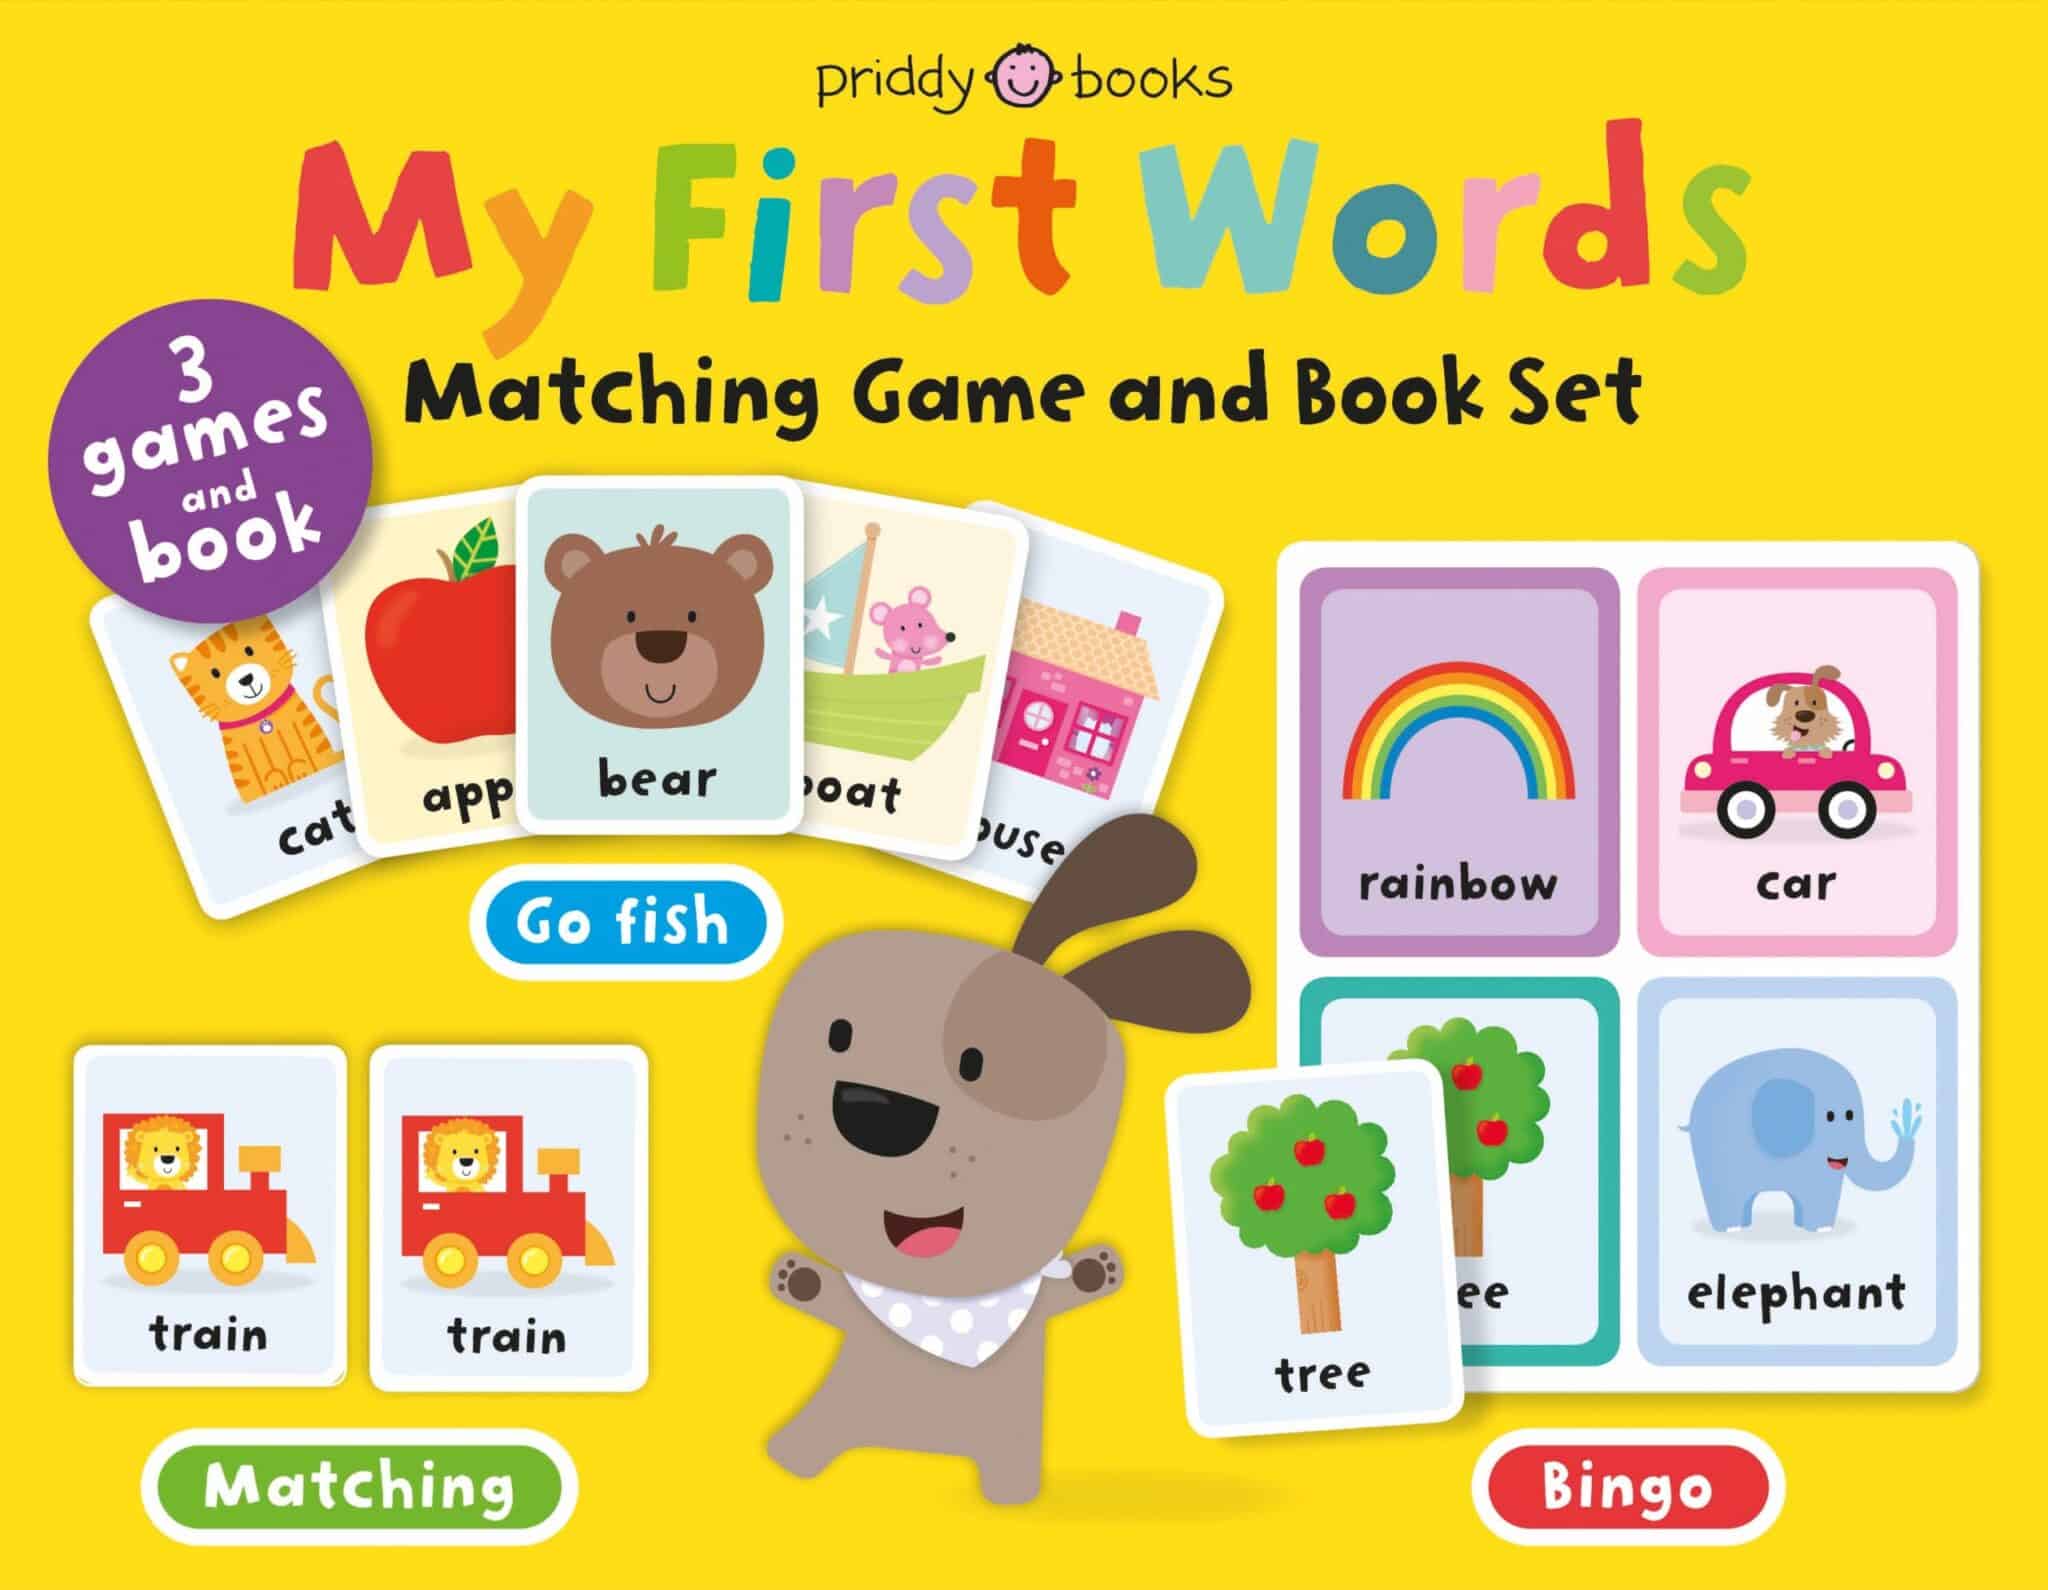 my-first-words-matching-game-and-book-set_1271184-2.jpg